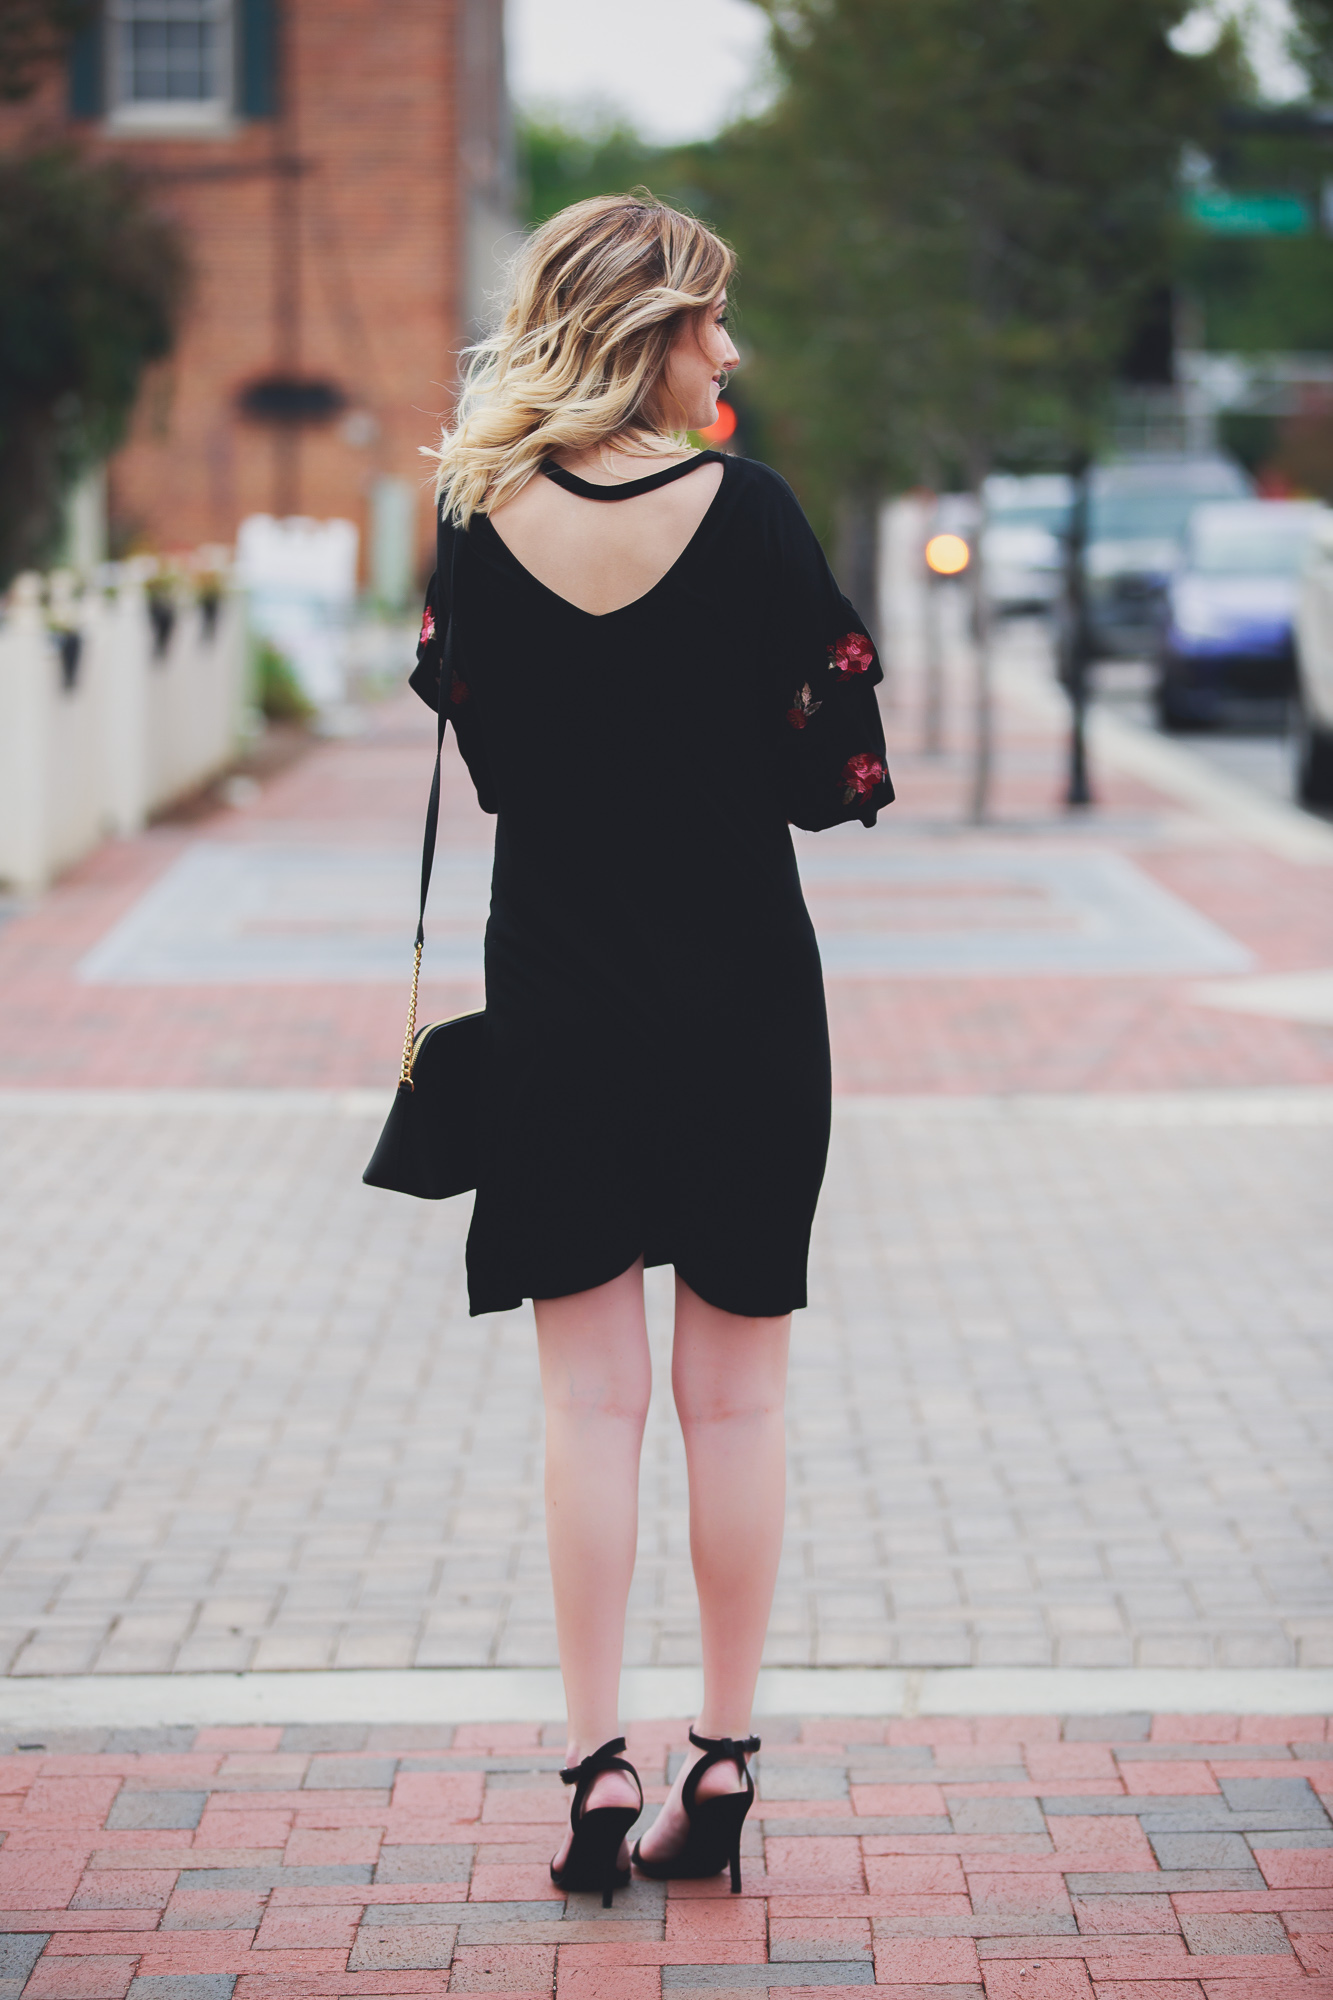 Fashion, lifestyle, and beauty blogger and vlogger Jessica Linn wearing a black ruffle sleeve dress with floral embroidery on the sleeves from Francesca's. Also carrying a Michael Kors purse and black heels from ASOS in Downtown Cary North Carolina.